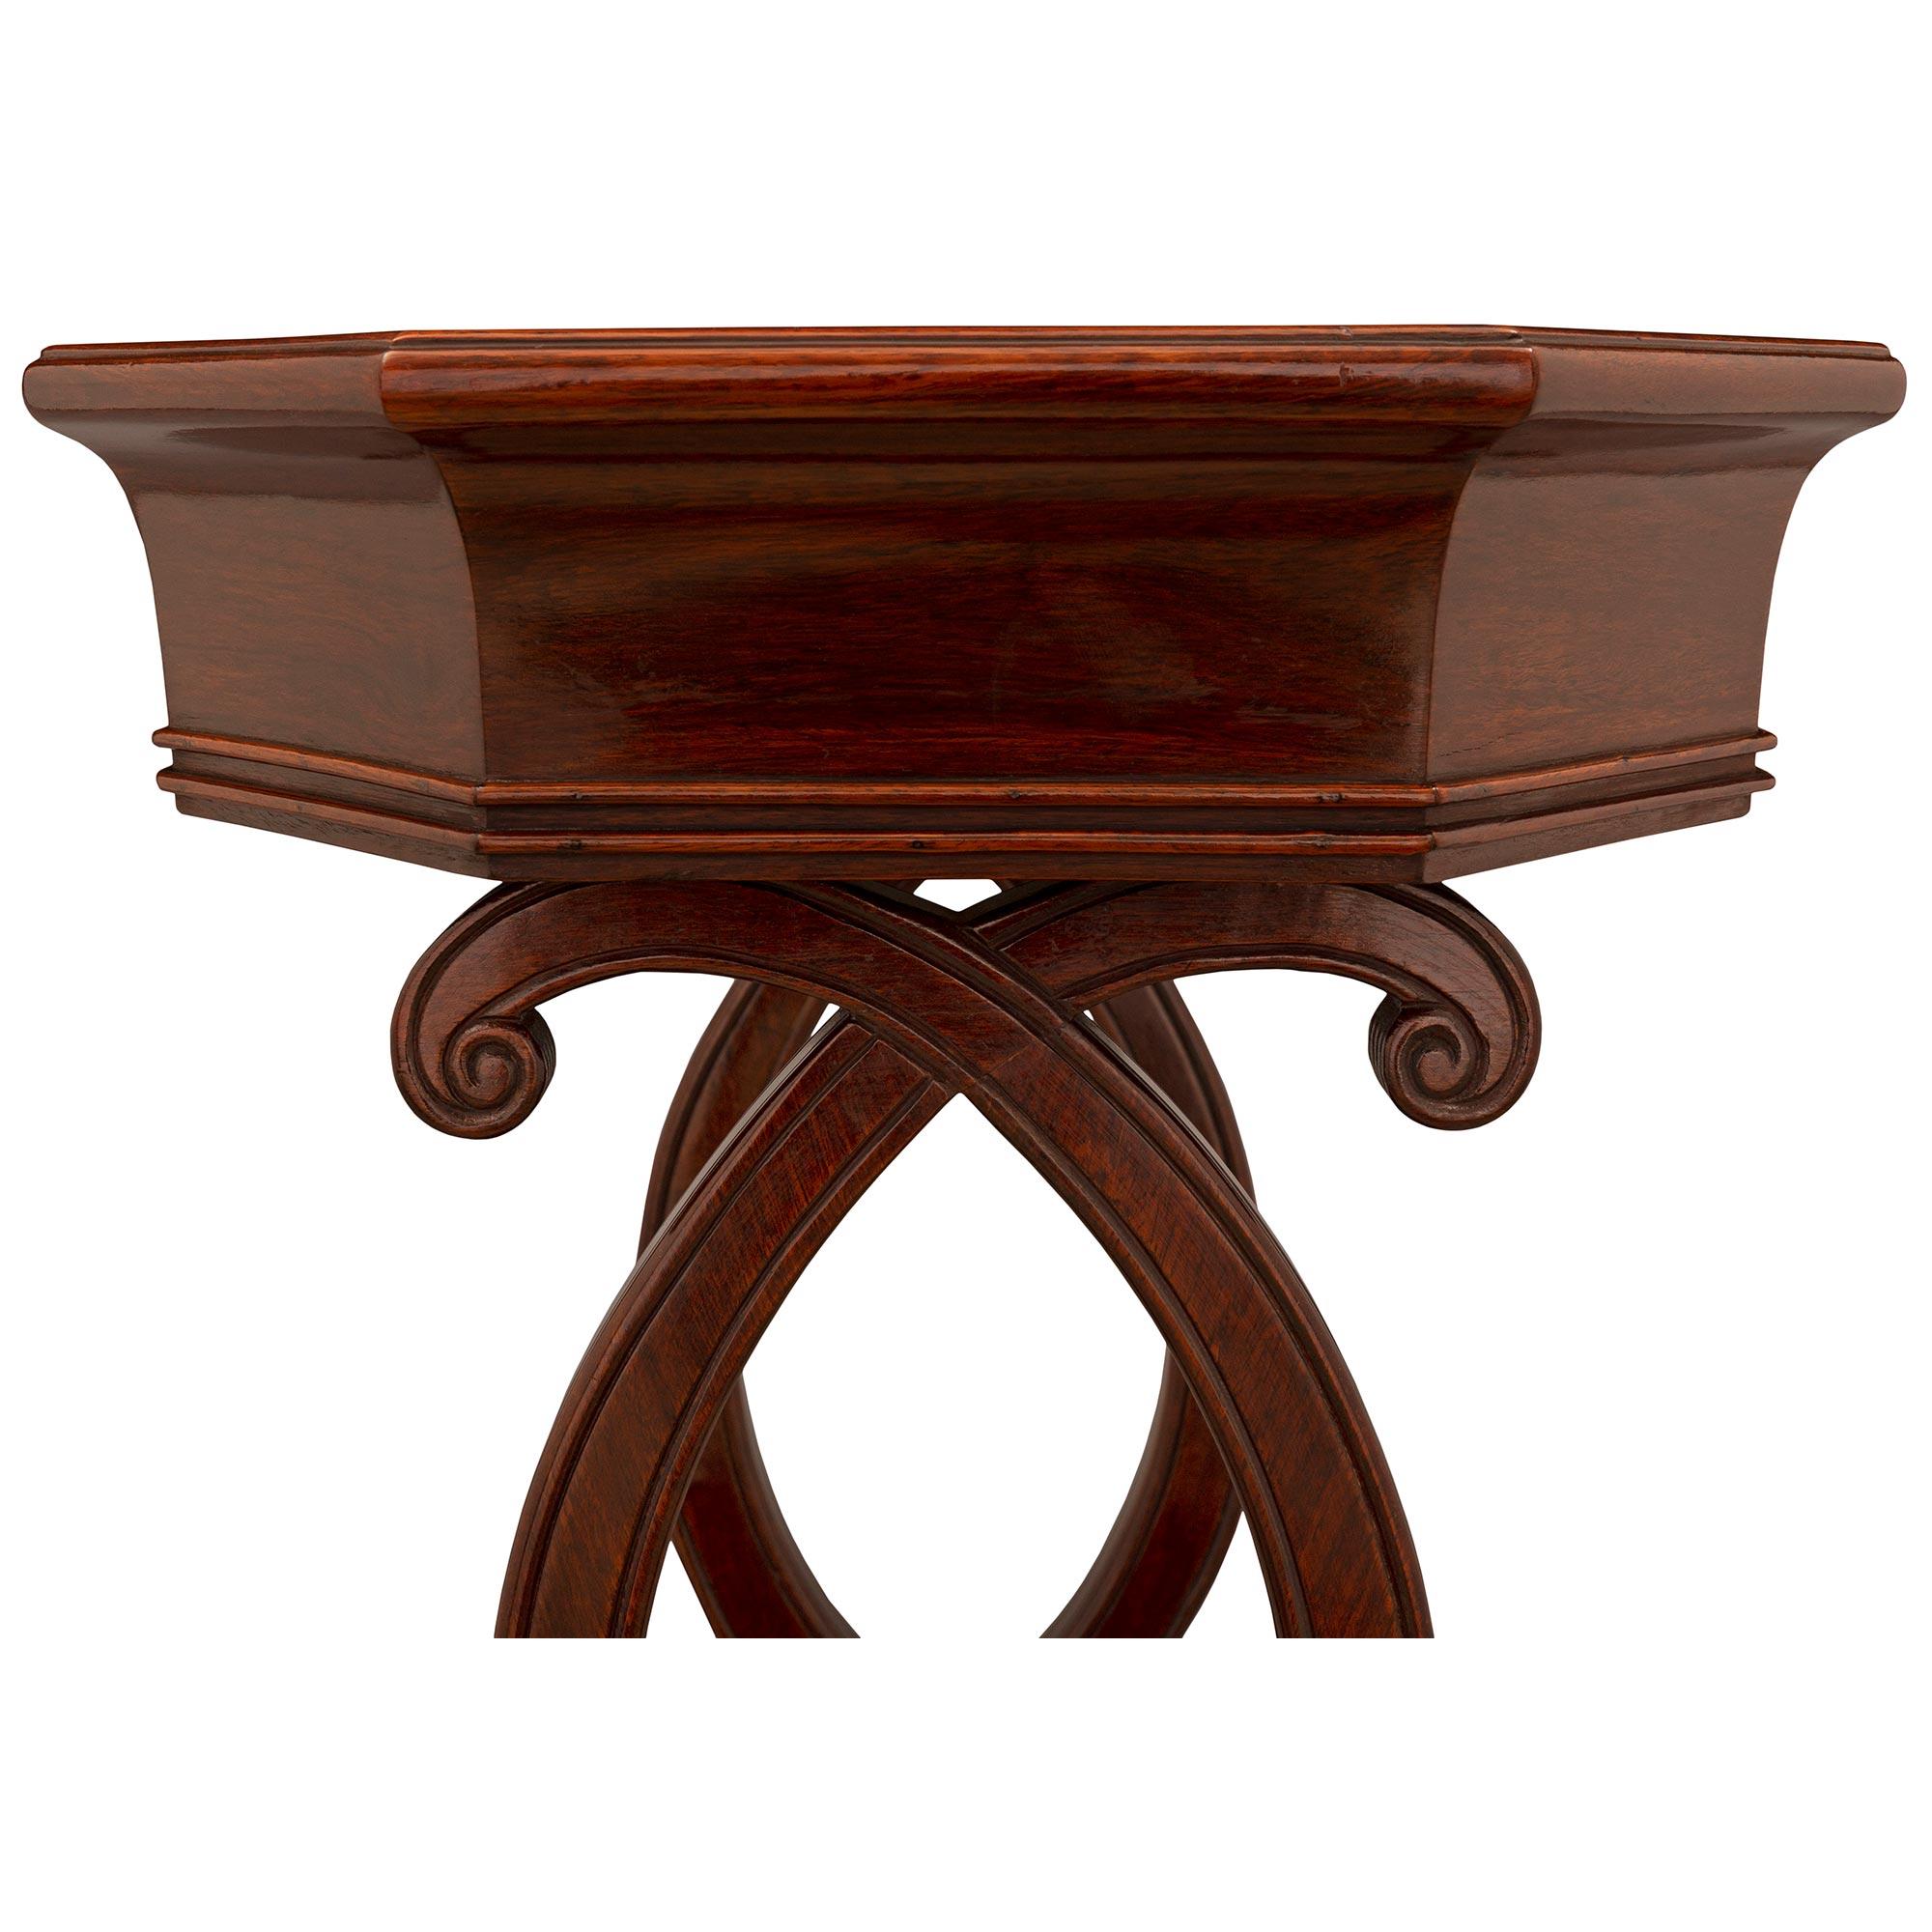 French Early 19th Century 1st Empire Period Mahogany Planter For Sale 3